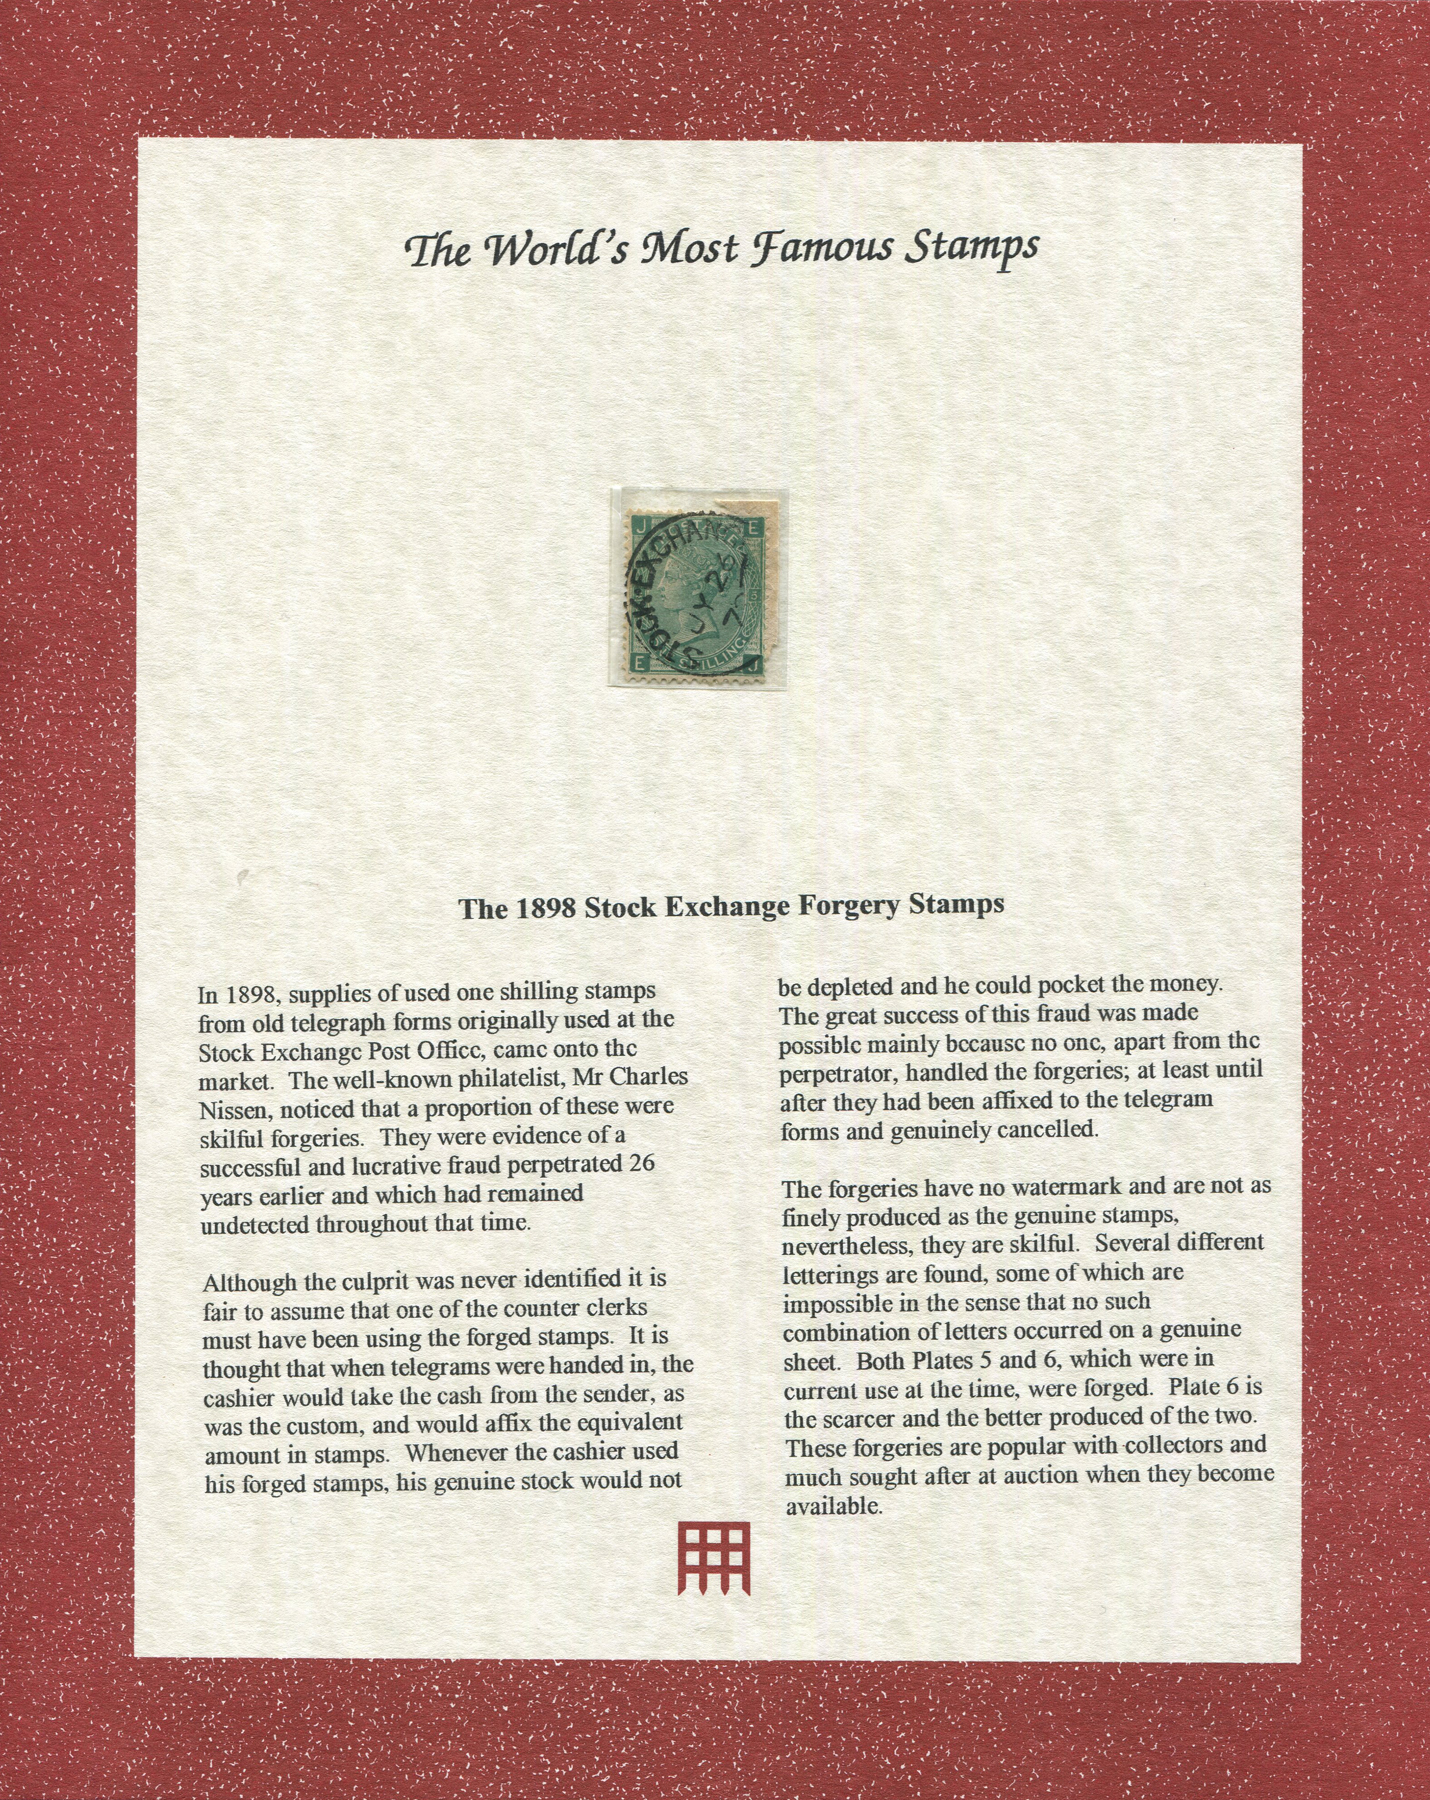 A Great Britain 1872 1 shilling green plate 5 Stock Exchange forgery stamp, within Westminster